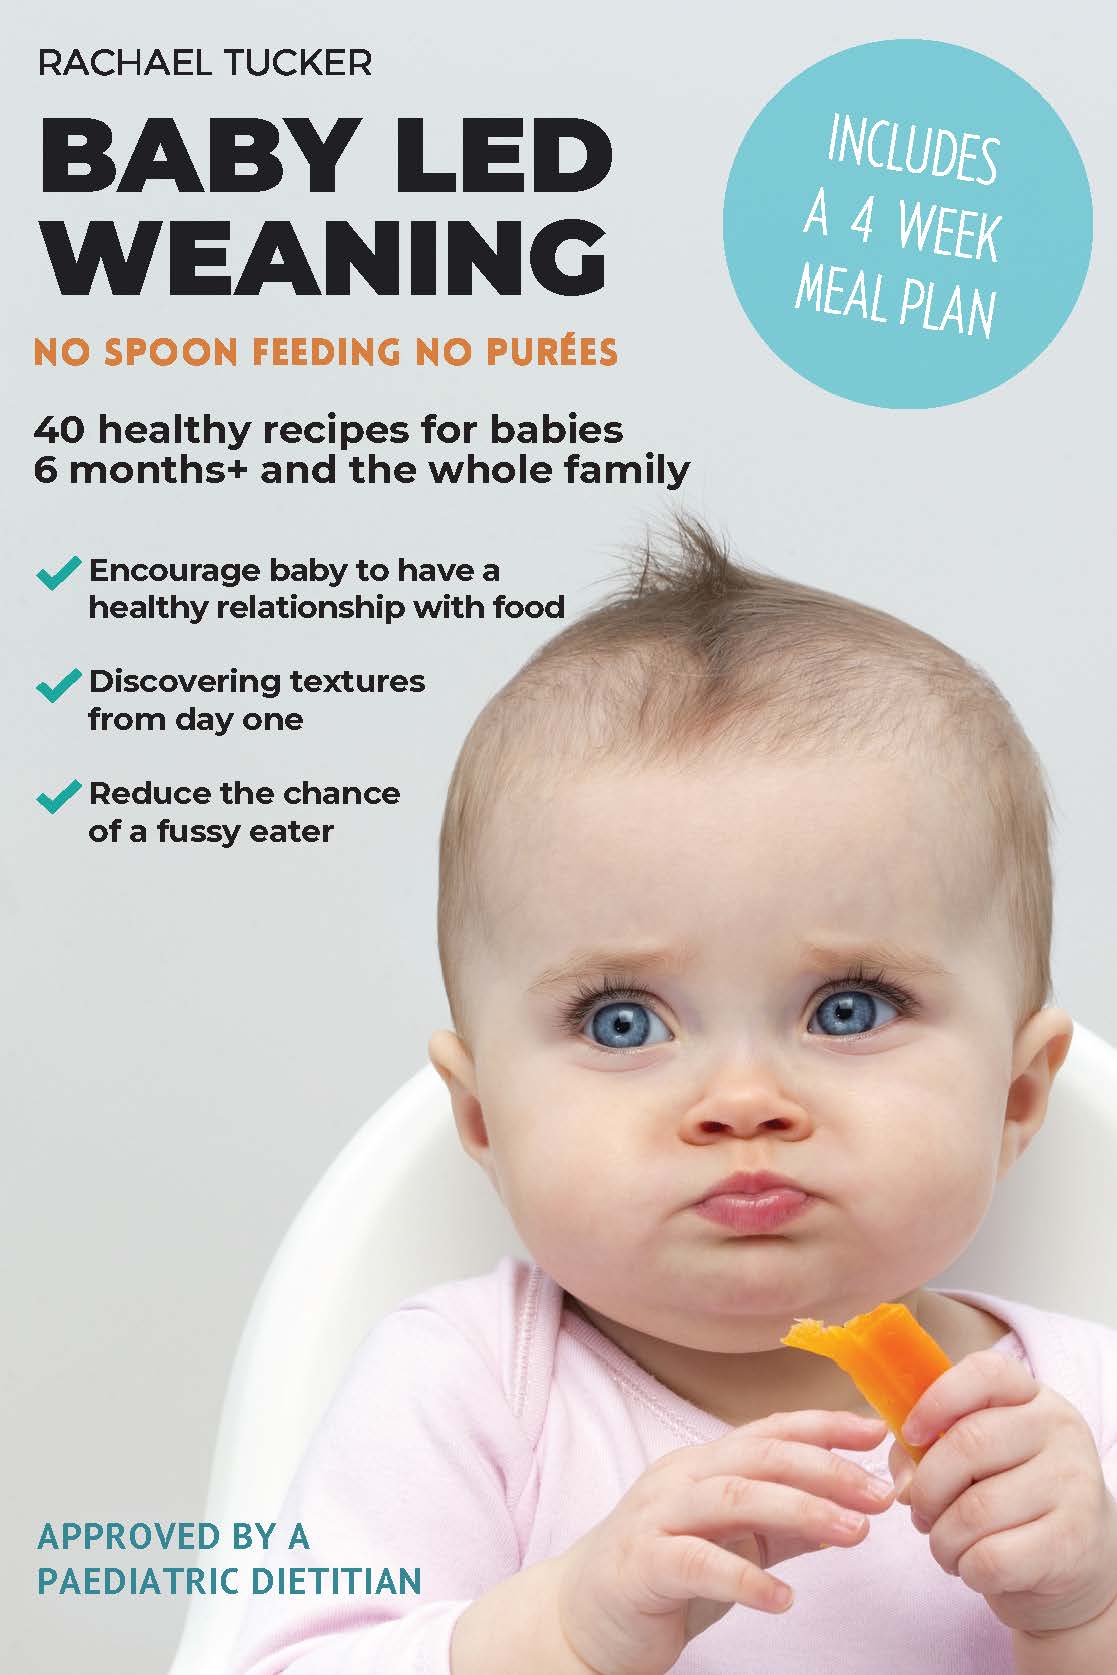 Baby-led Weaning: The Next Milestone for Your Baby